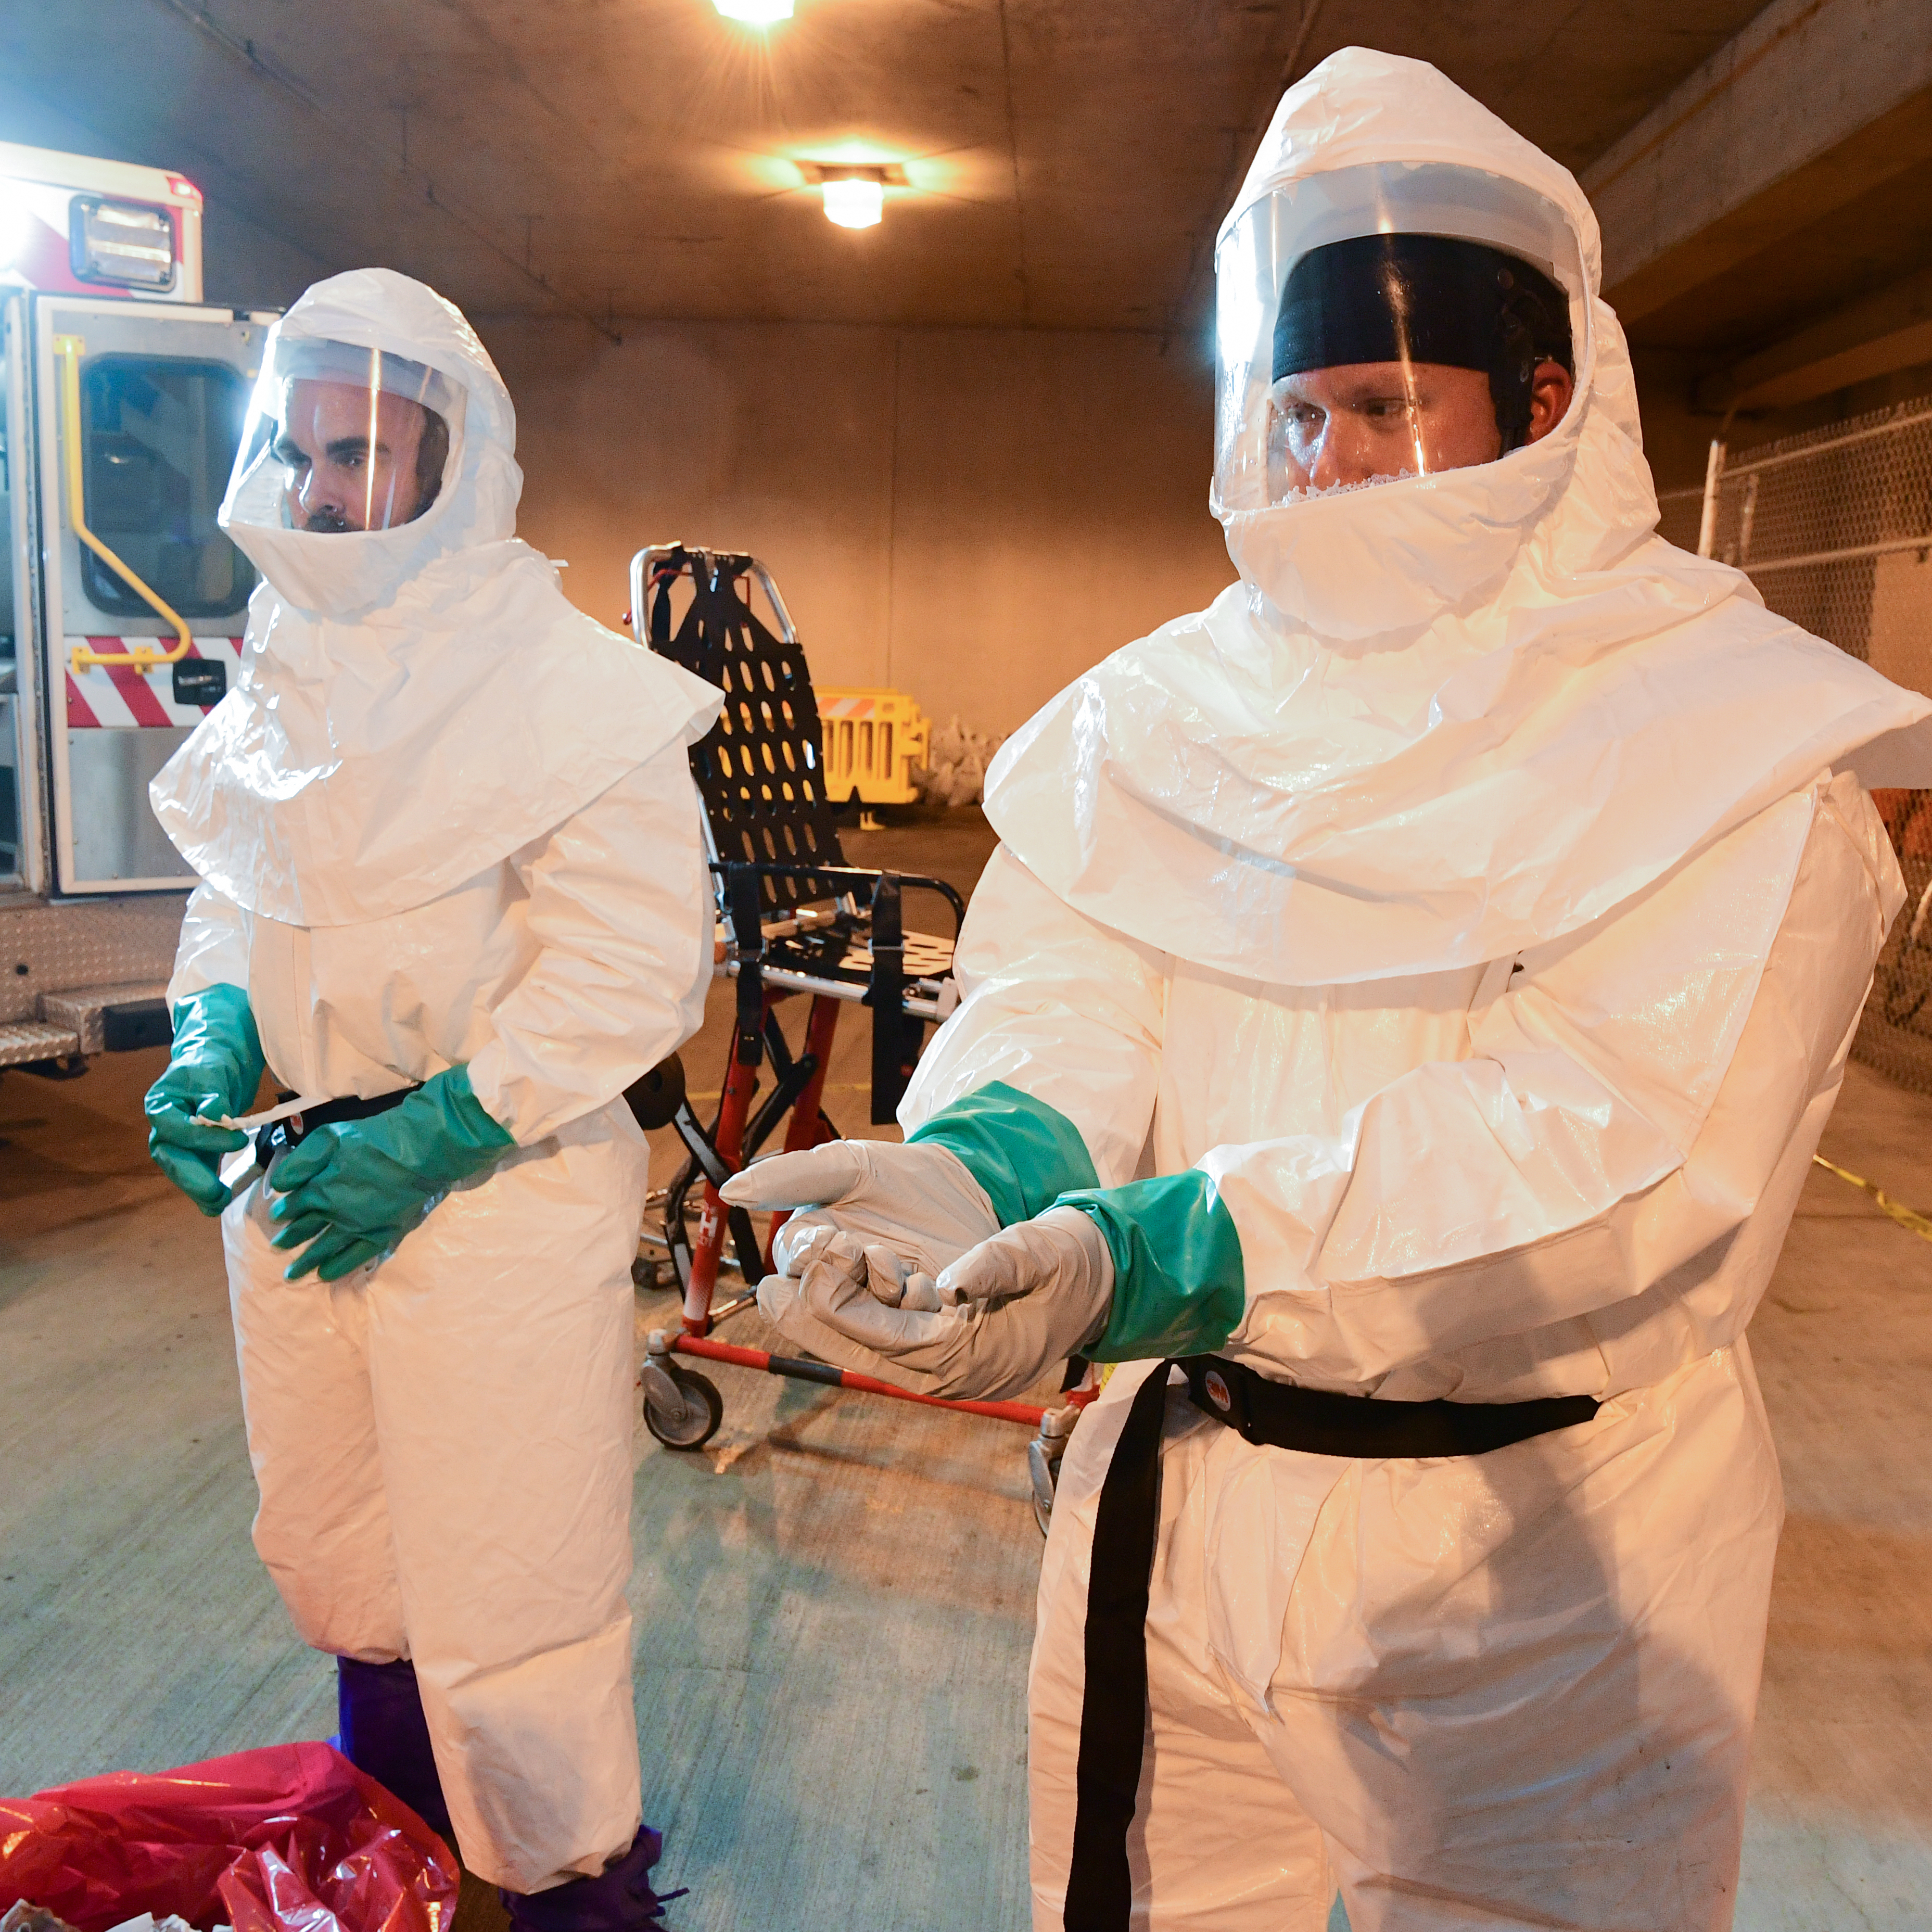 Two people suiting up into the protection suit and putting on gloves